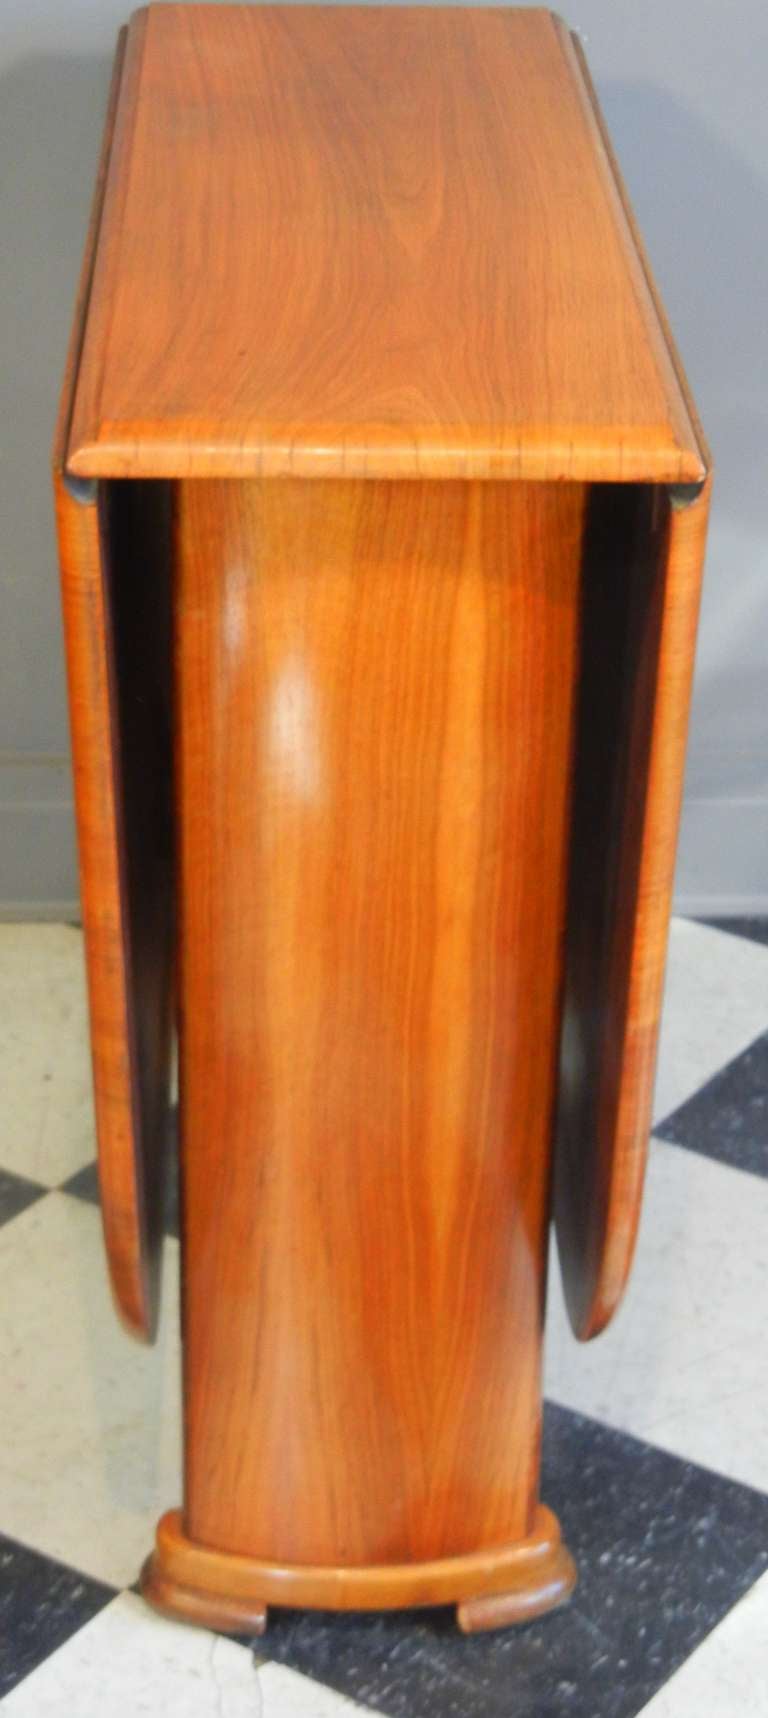 French Art Deco Drop Leaf Table in Wide-Board Cherrywood, Seats Six